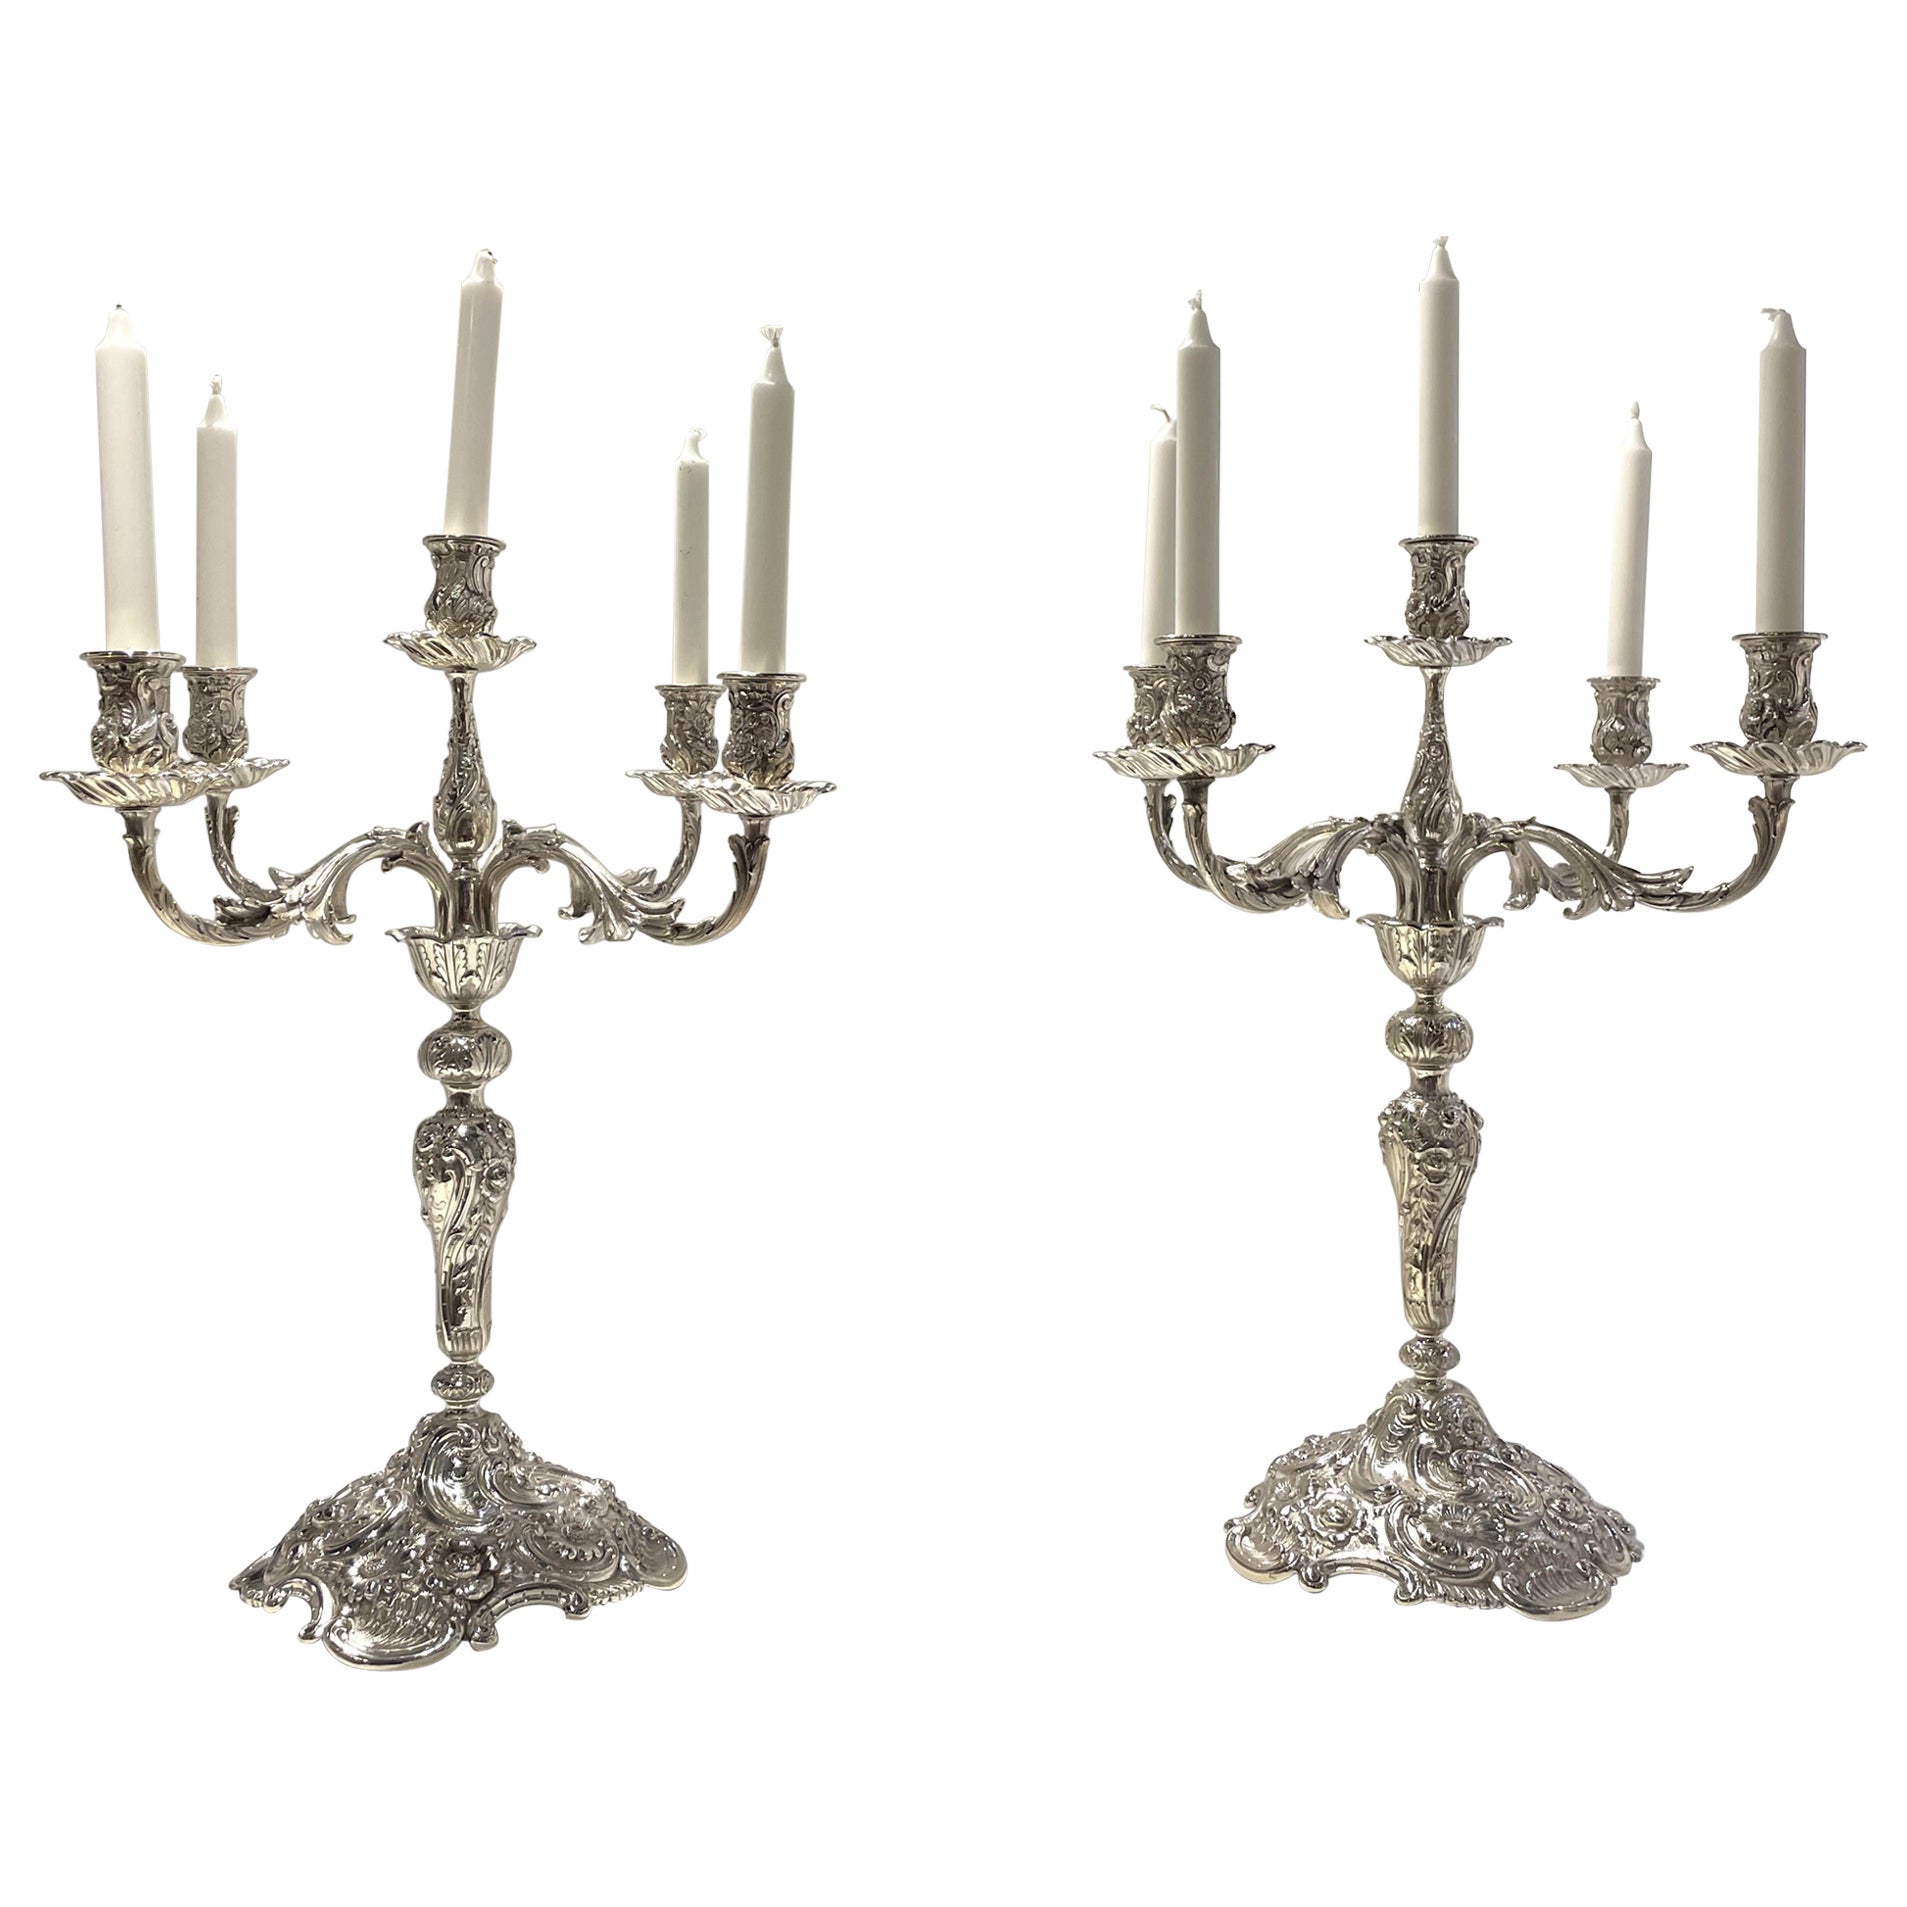 Pair of Tiffany & Co. Sterling Silver 5-Light Monumental Repousse Candelabra For Sale